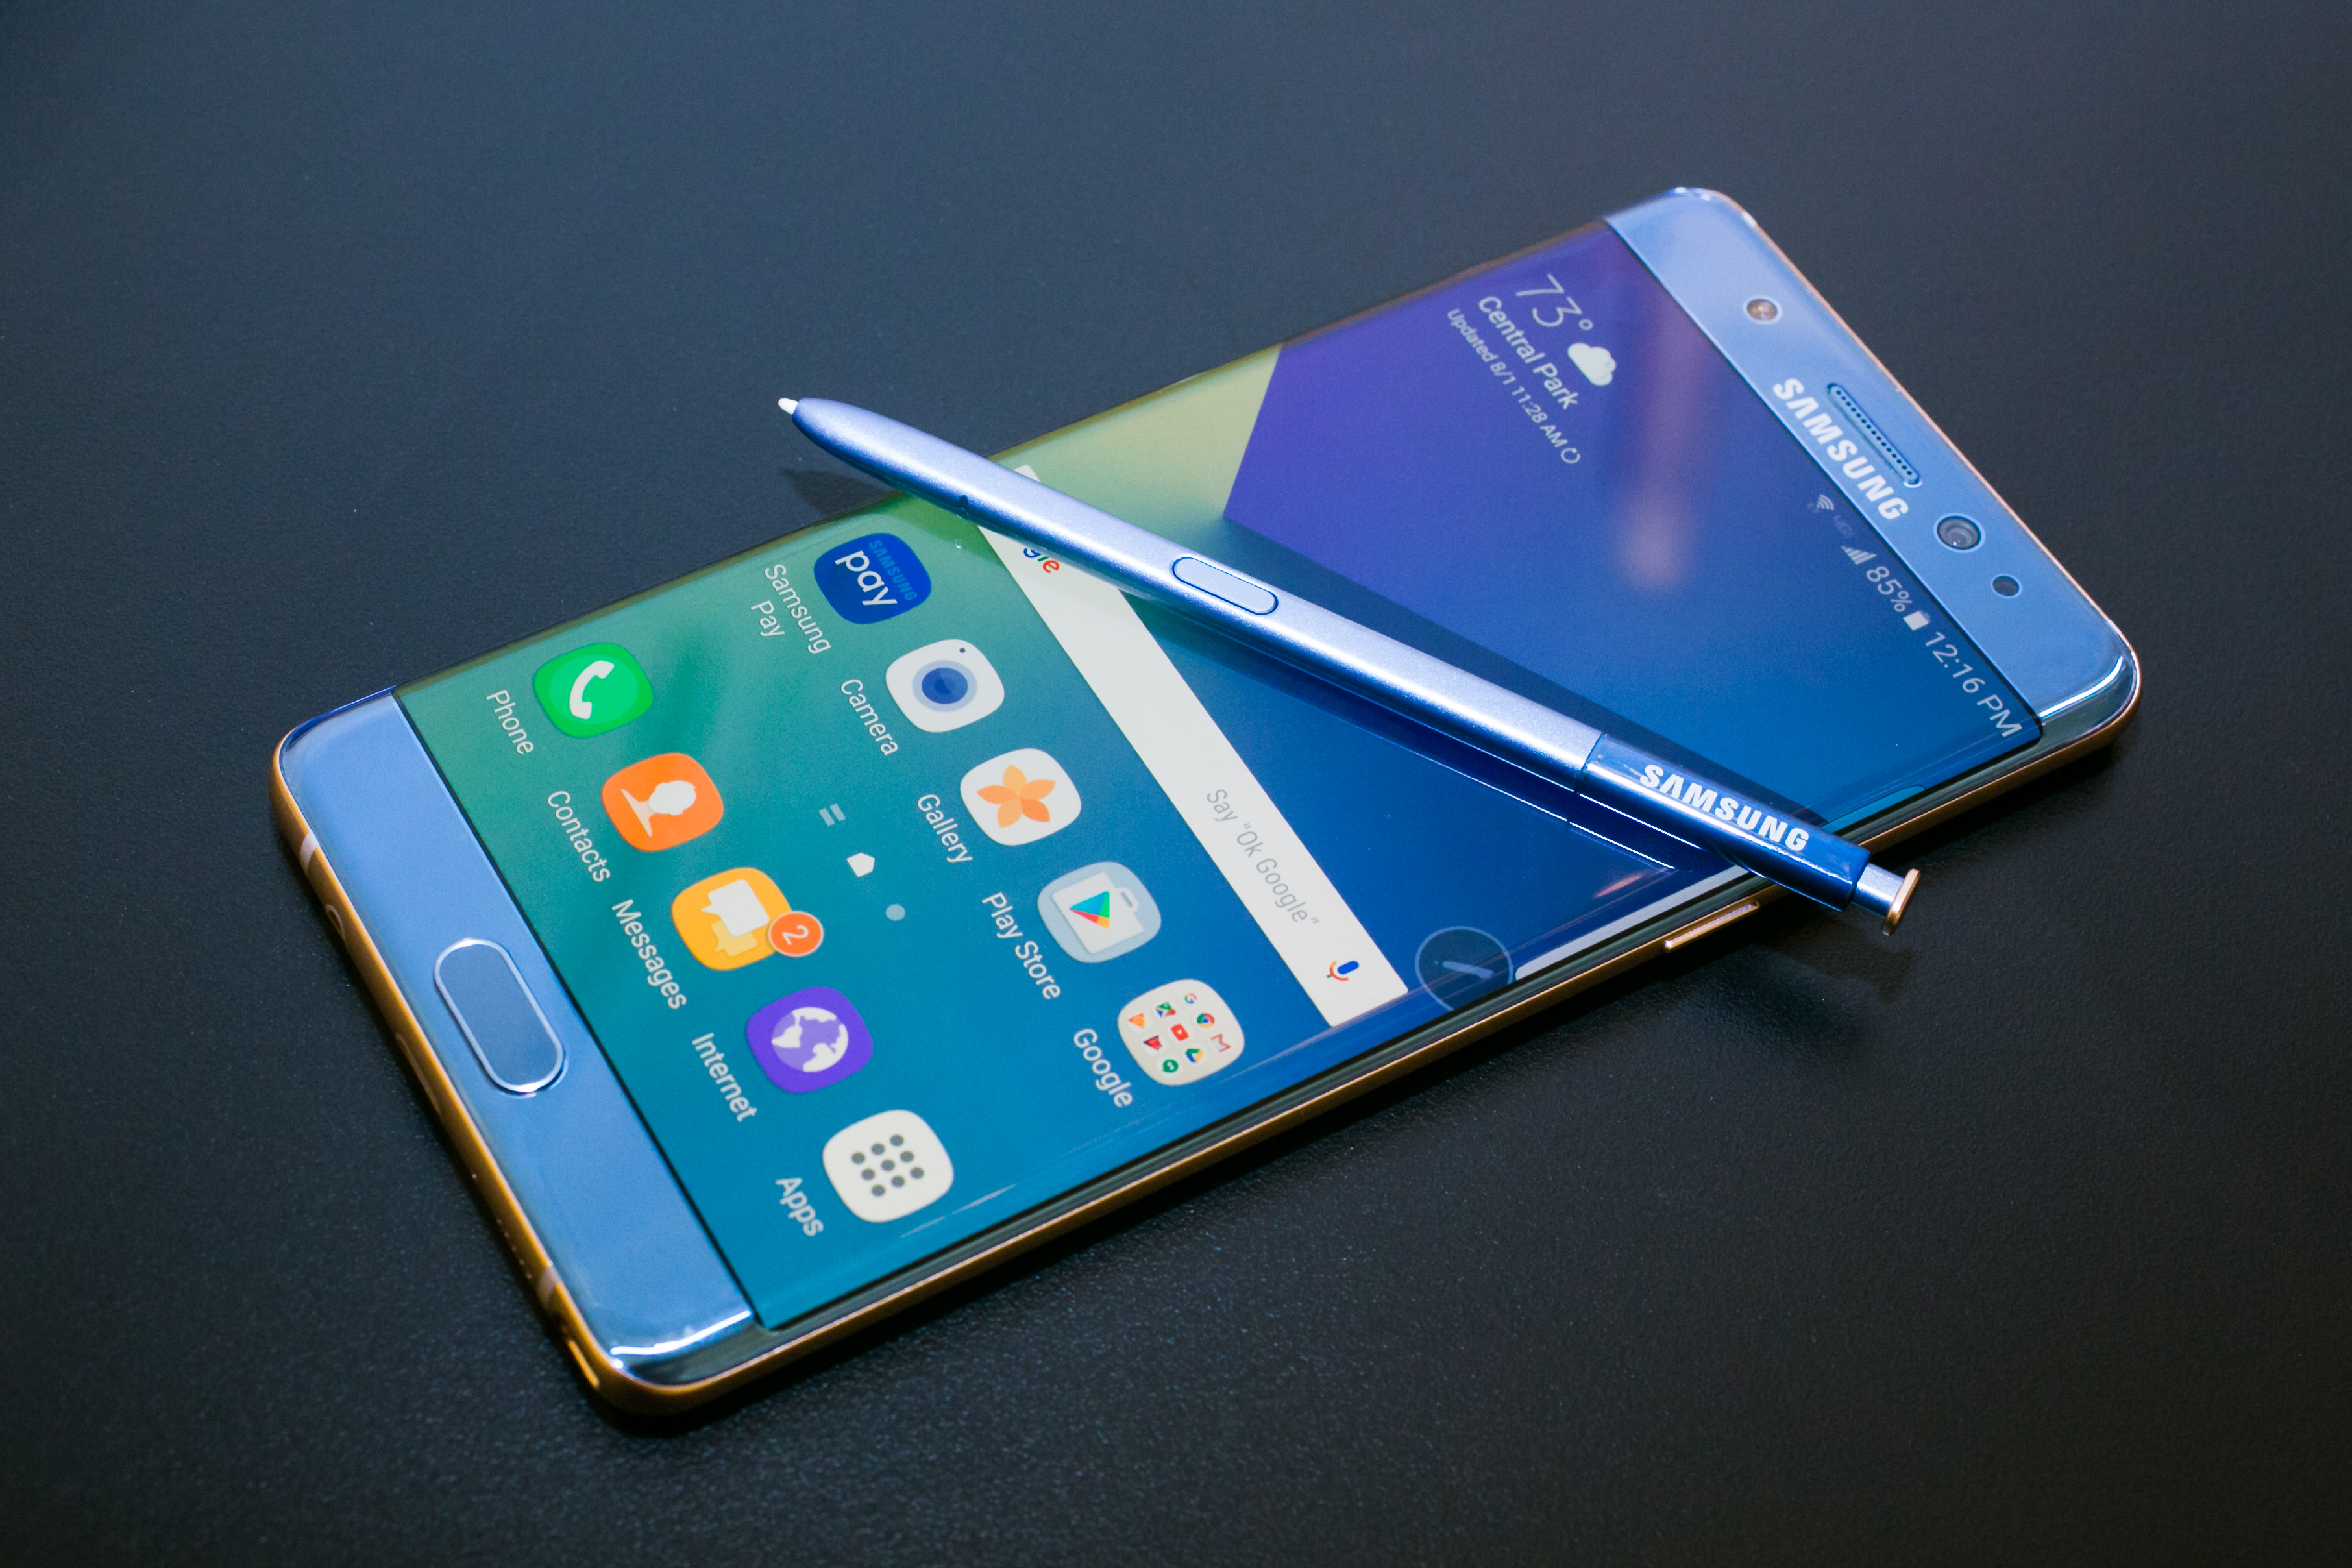 Note 7 note 11. Samsung Note 7. Самсунг галакси ноут 7. Samsung Galaxy Note 7 2016. Samsung Galaxy s 7 Note.